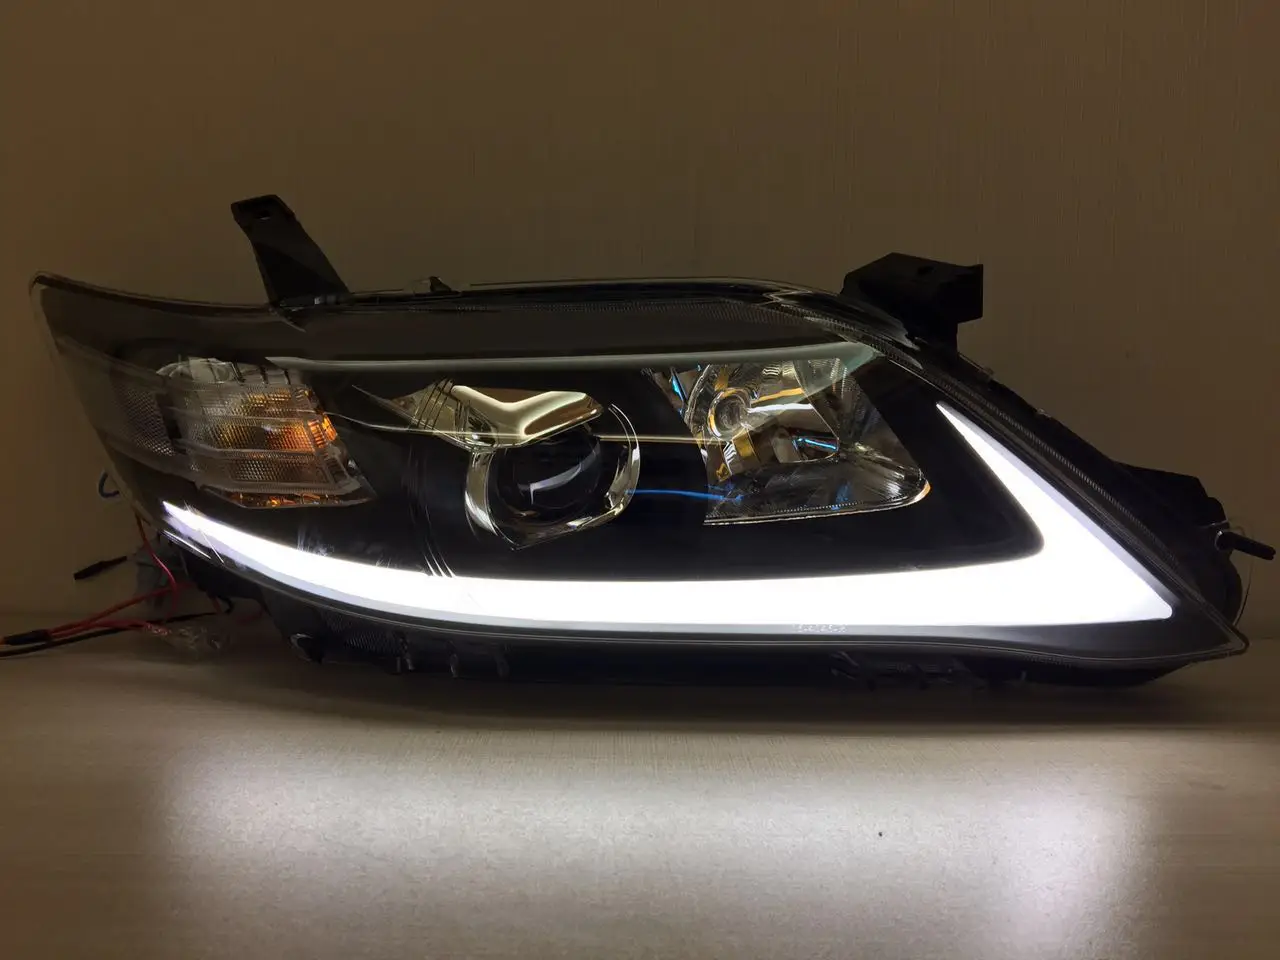 VLAND manufacturer for car lamp for Camry headlight 2009 2010 2011 for Camry modified led head lamp in China